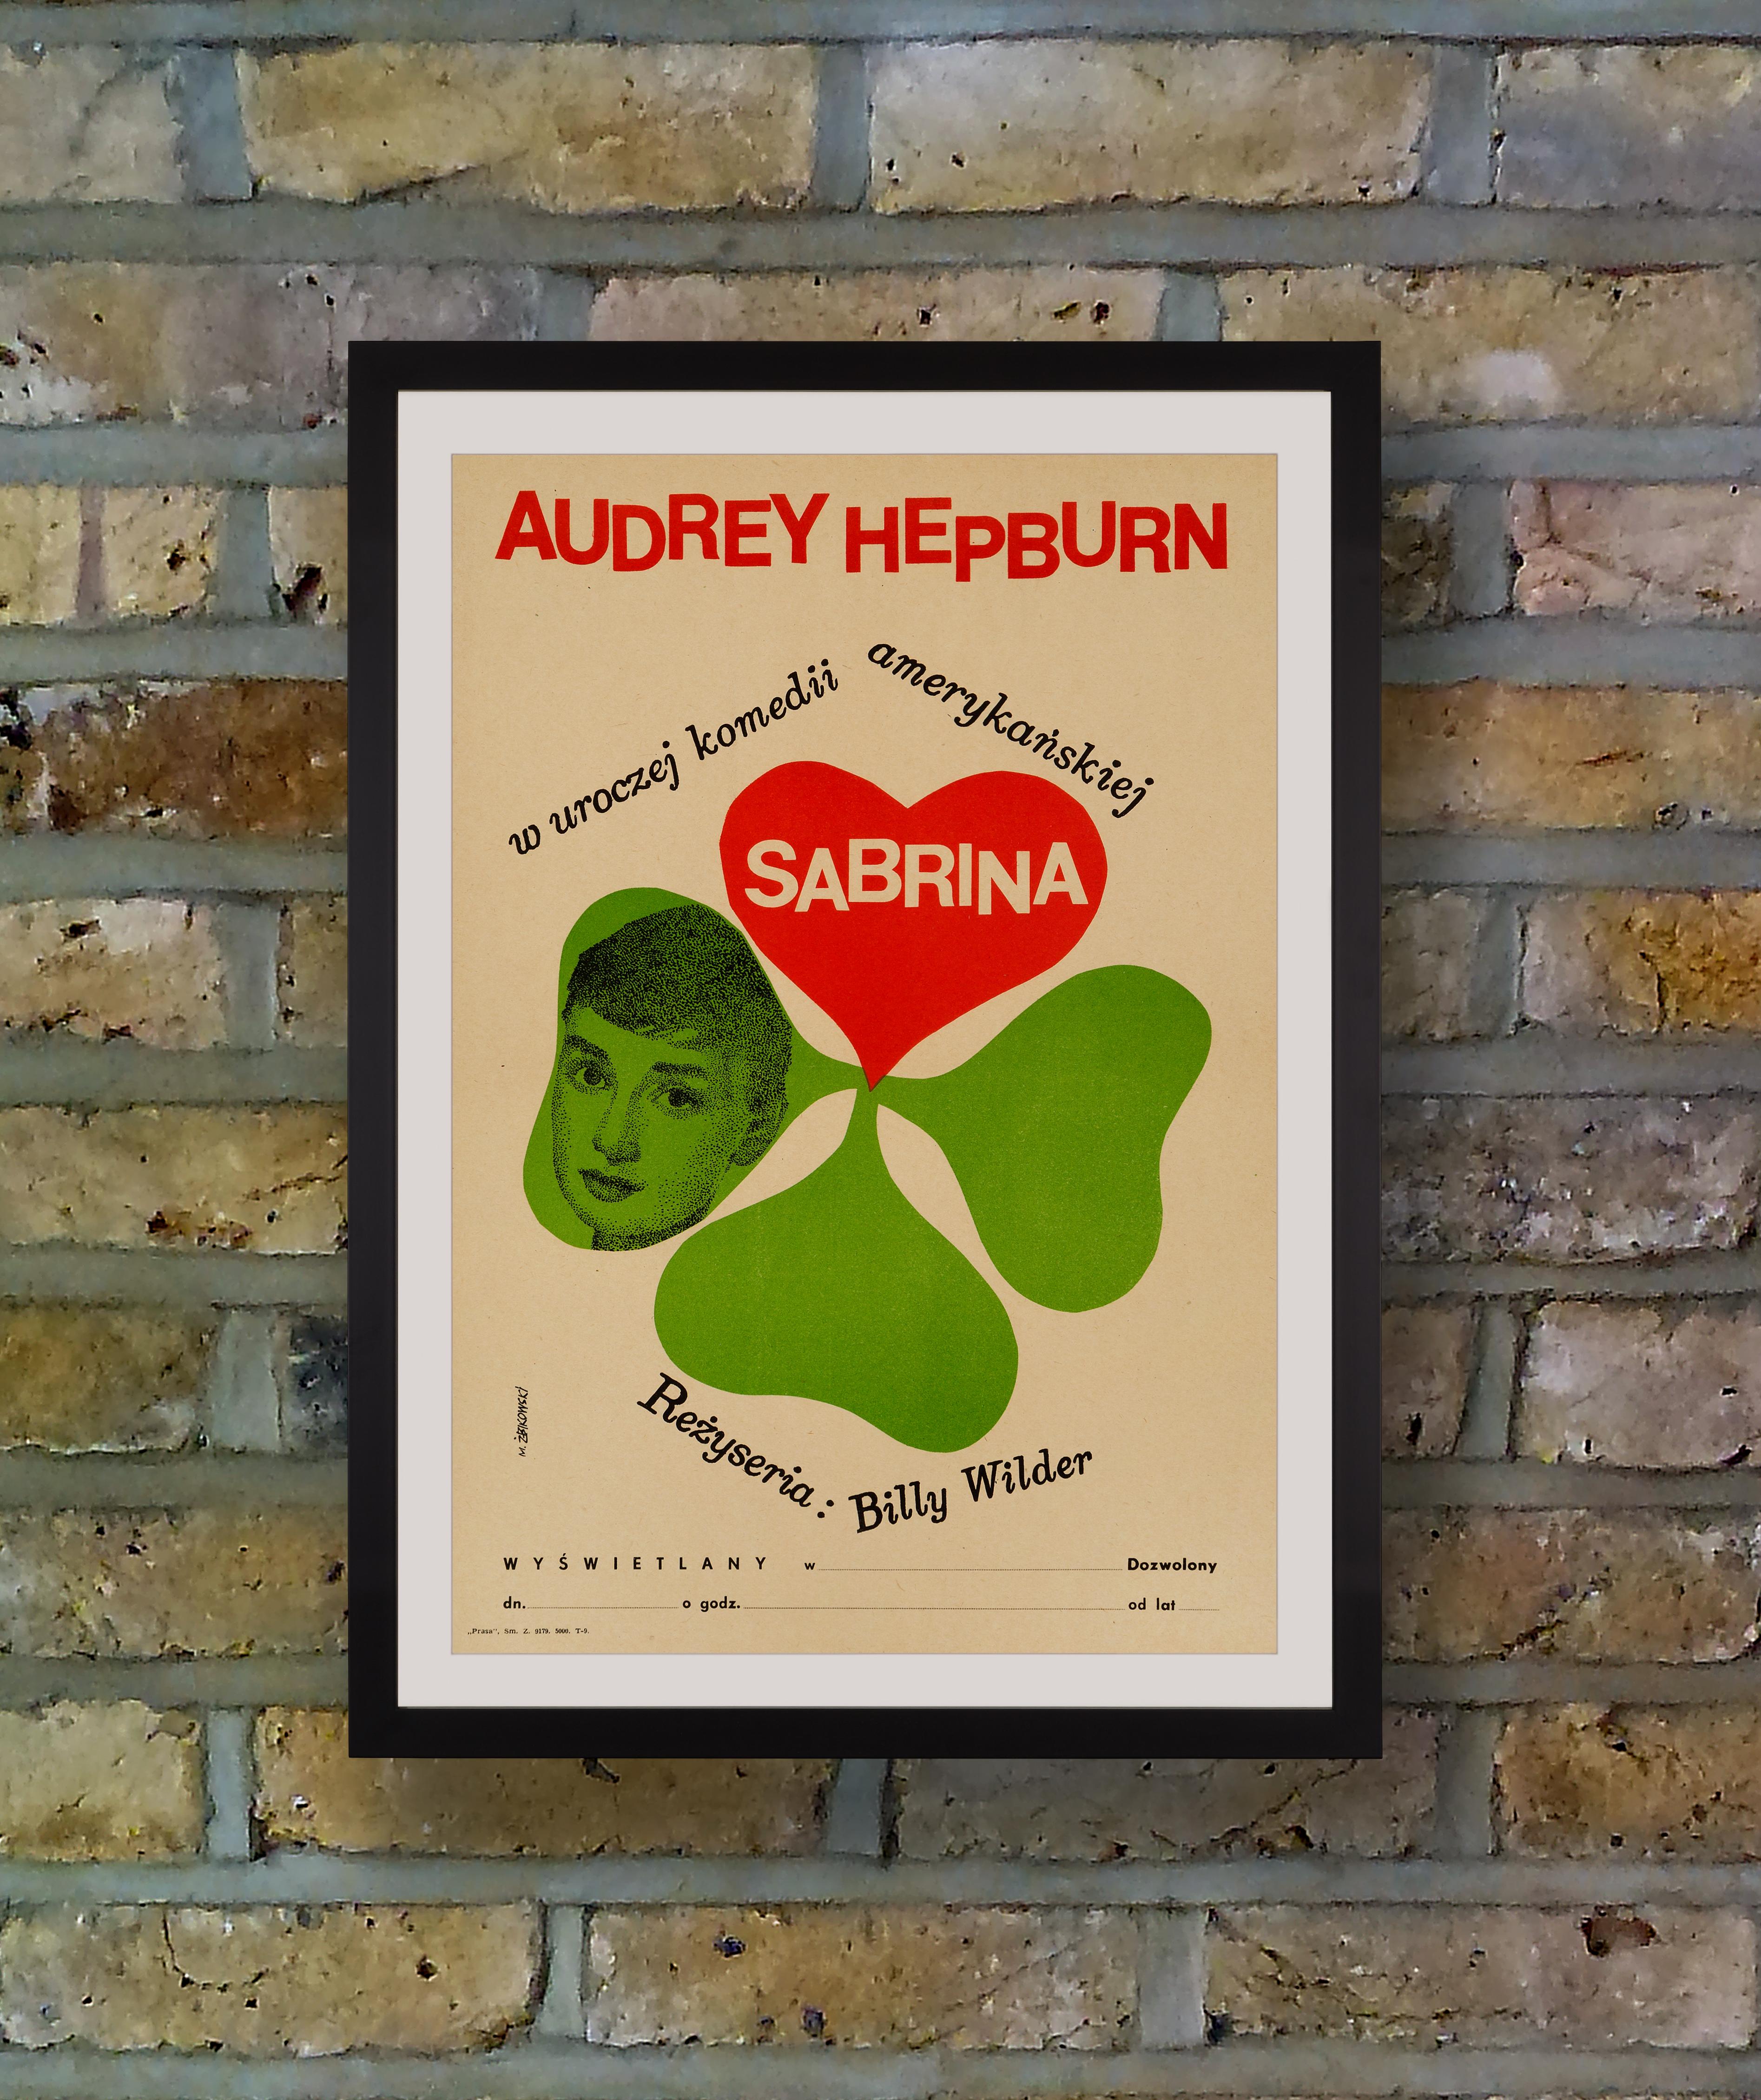 Artist Maciej Zbikowski pictured a portrait of Audrey Hepburn within the petal of a lucky four leaf clover on this rare and quirky mini poster for the first Polish release of 